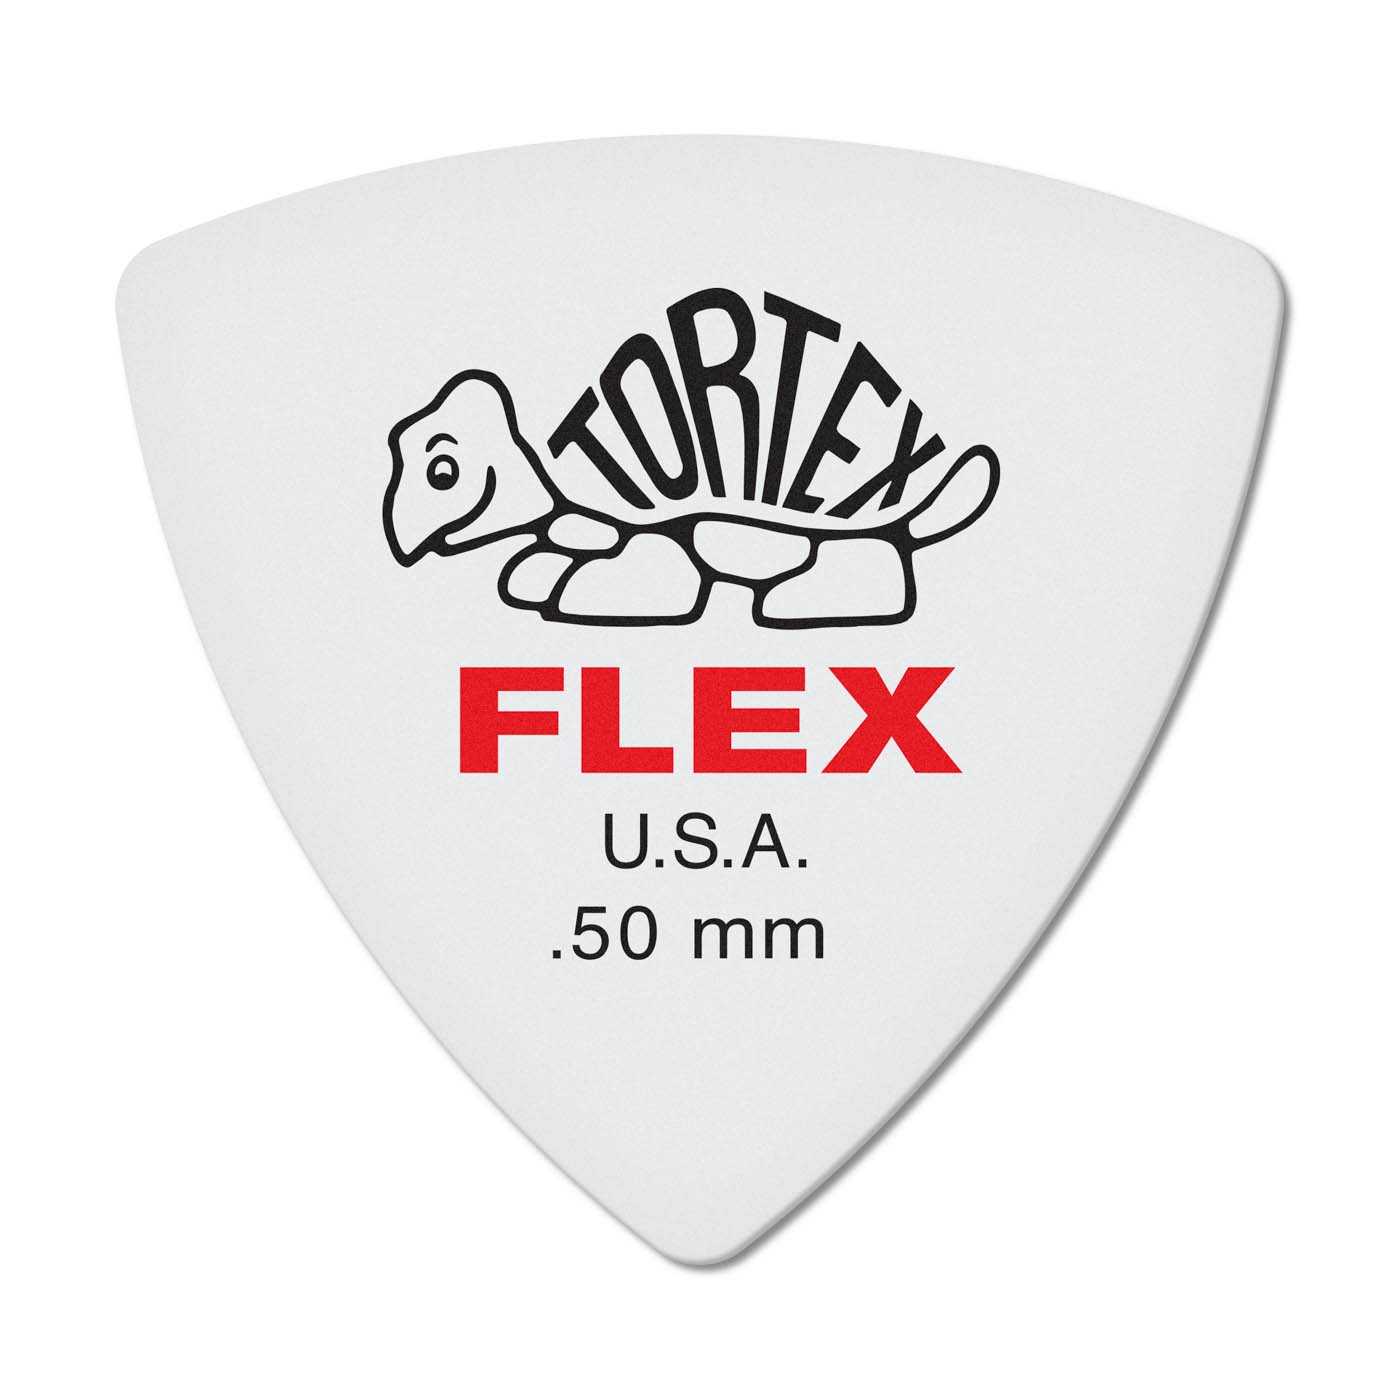 Image 2 of Dunlop Tortex Flex Triangle .50MM Flatpick Player's Pack, 6 Picks - SKU# PK456P-50 : Product Type Accessories & Parts : Elderly Instruments